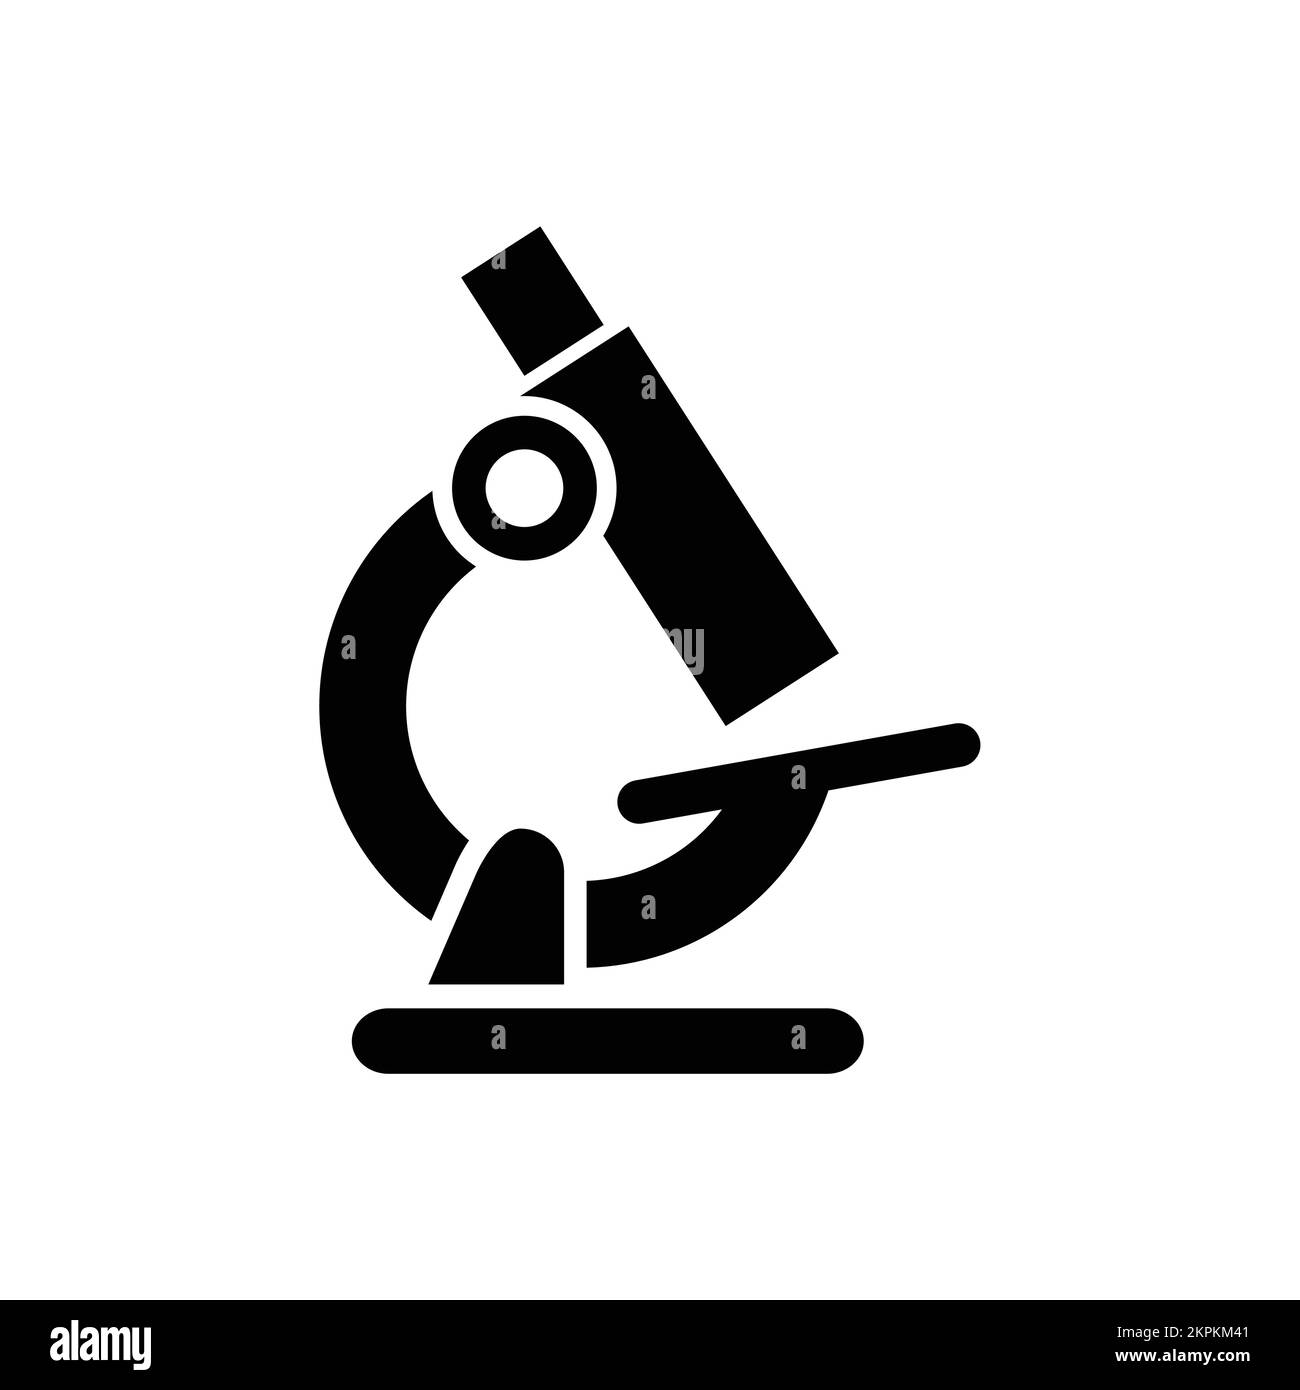 Simple optical single nose microscope with single objective icon vector. Medical laboratory or research symbol icon. Stock Vector